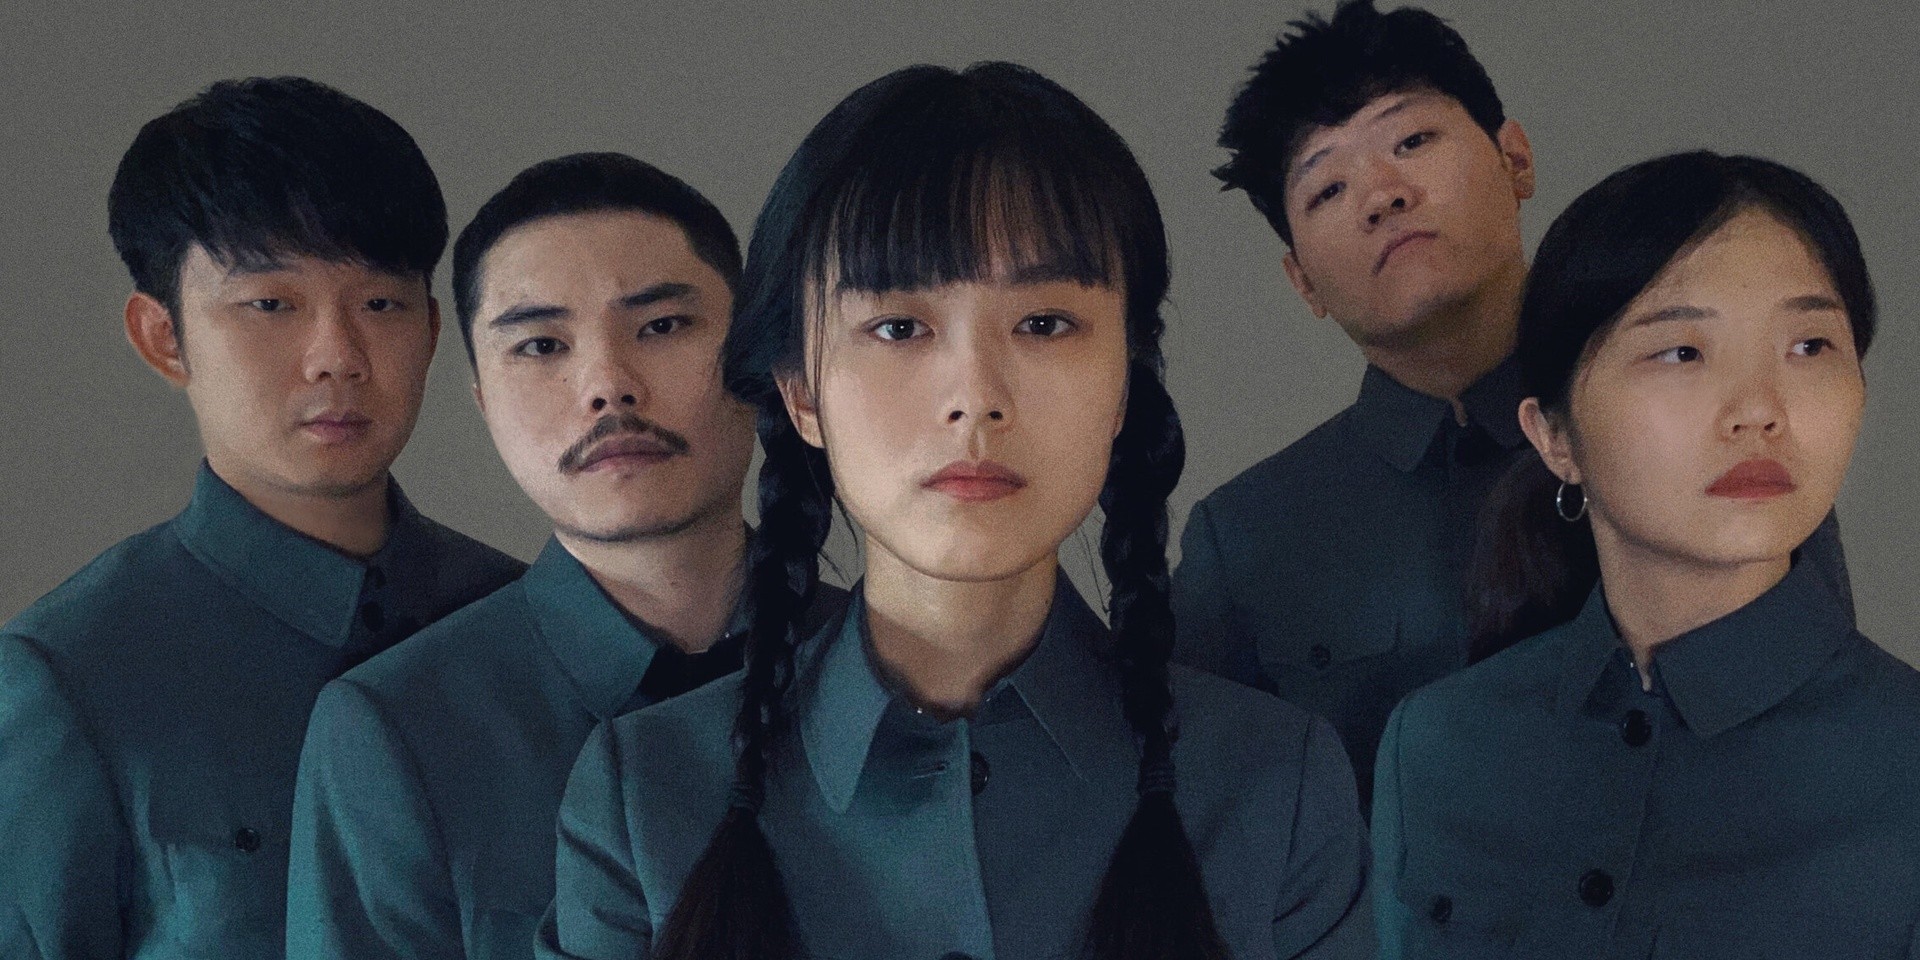 Introducing: Hiperson on making an album in lockdown and playing sold-out shows in China amidst a global pandemic